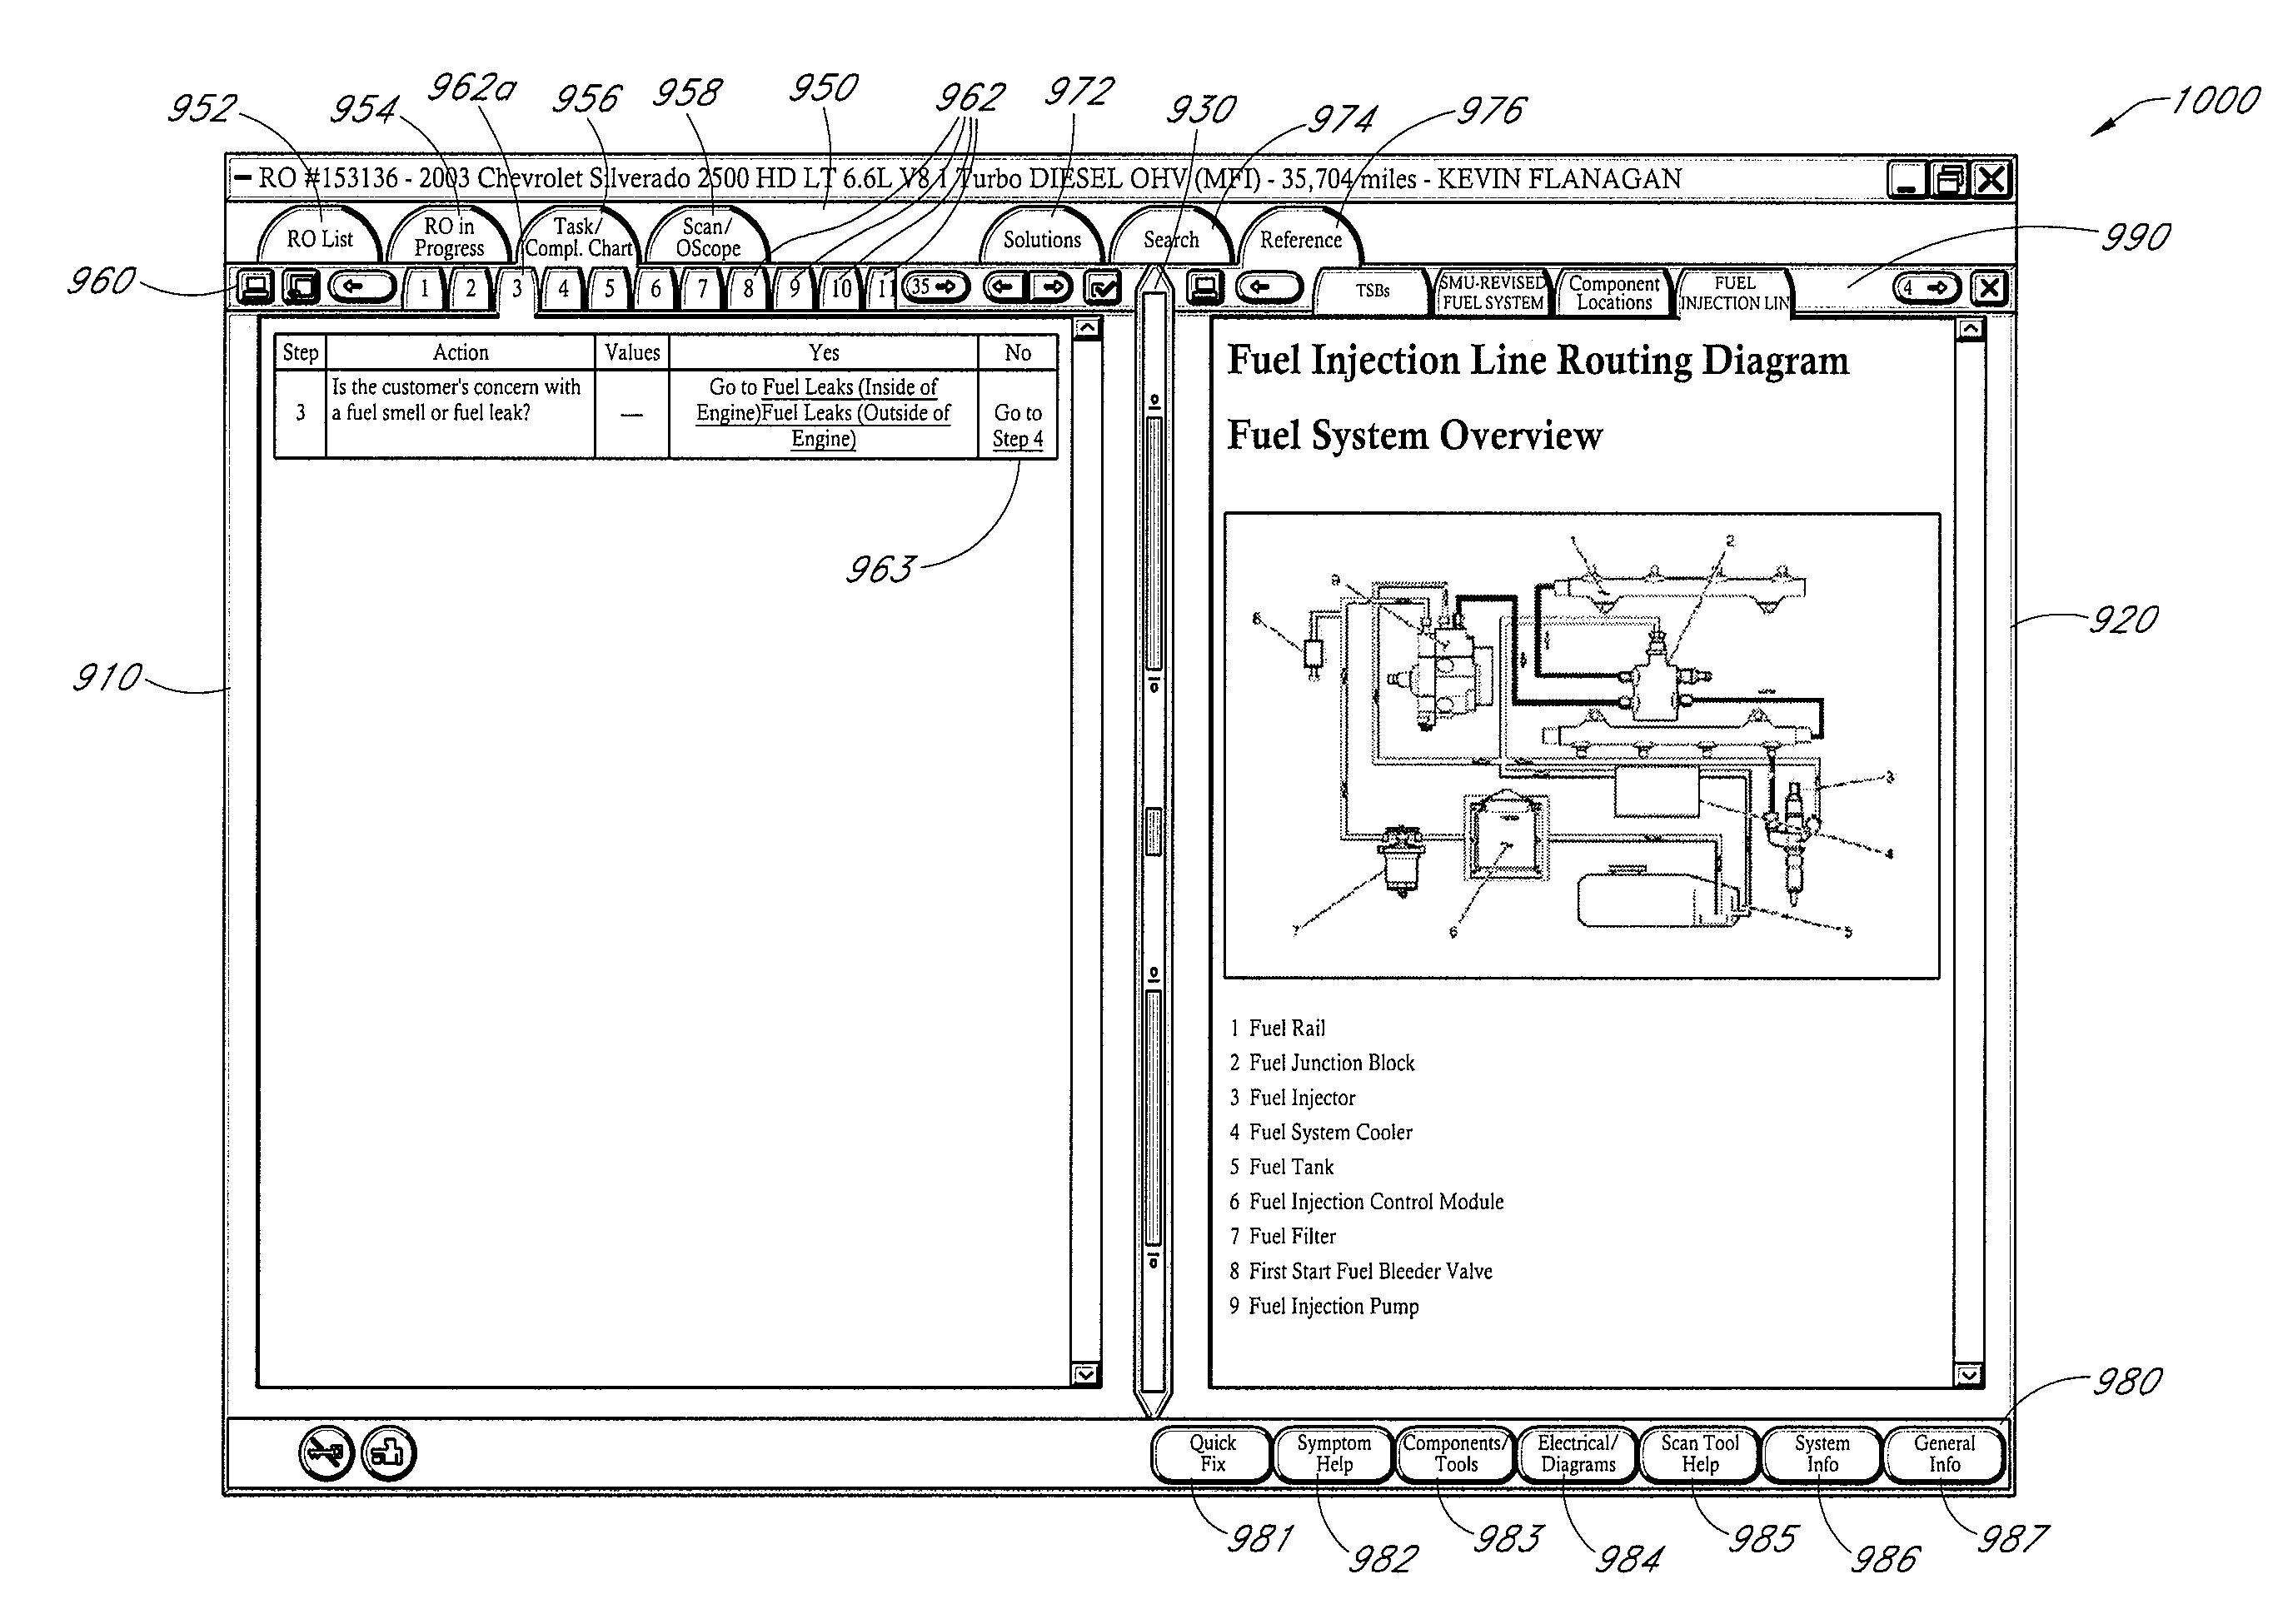 User interface for display of task specific information